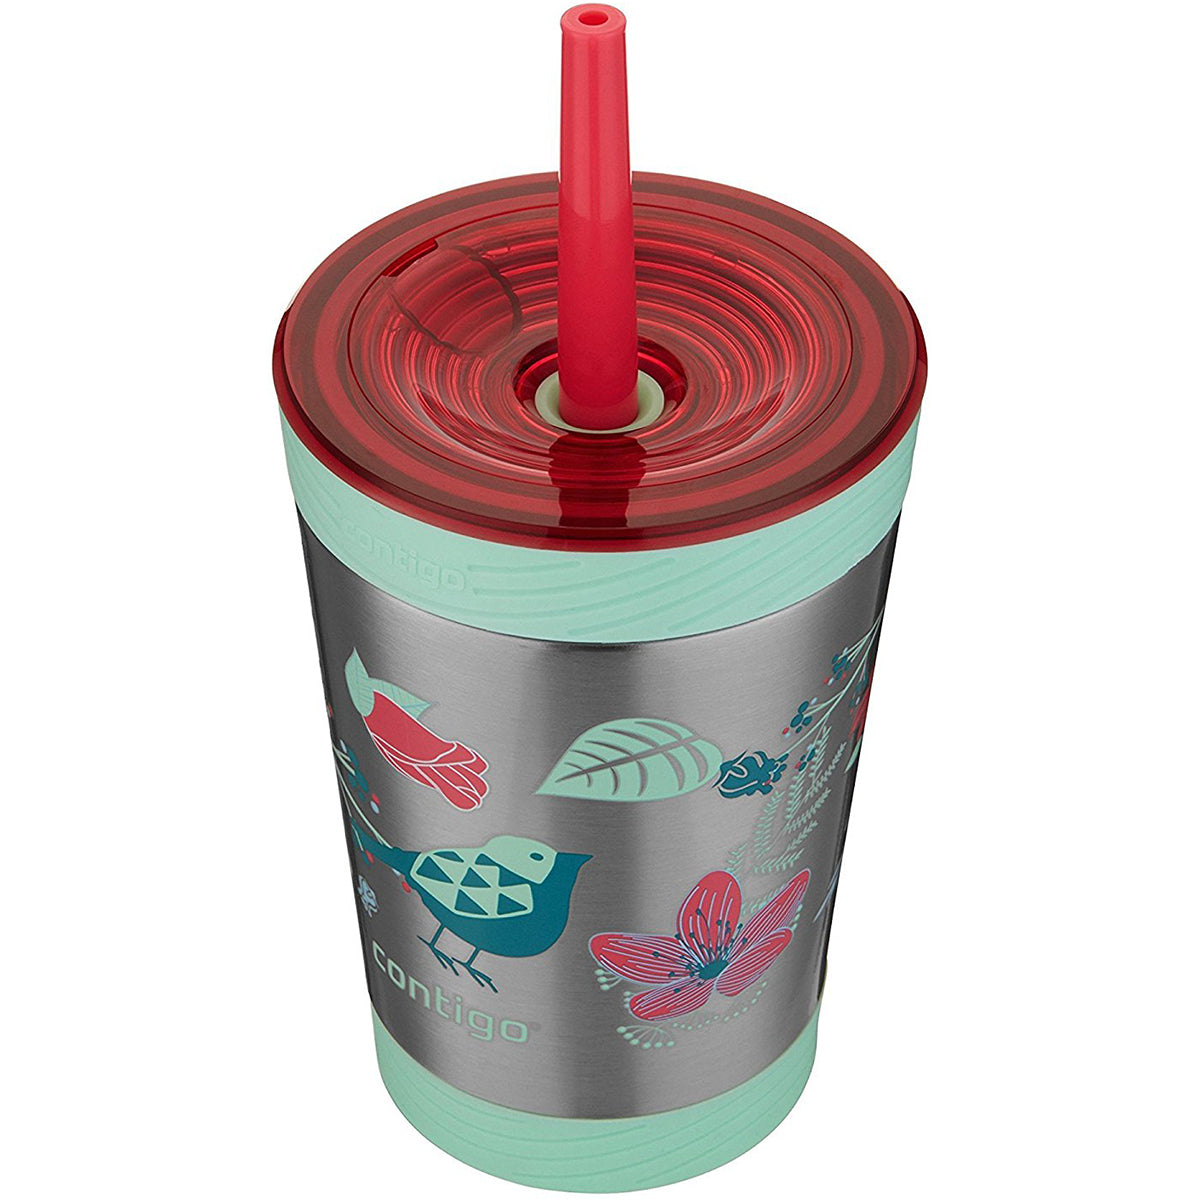 Contigo Spill-Proof Kids Tumbler with Straw, 3-Pack, Sprinkles, Wink